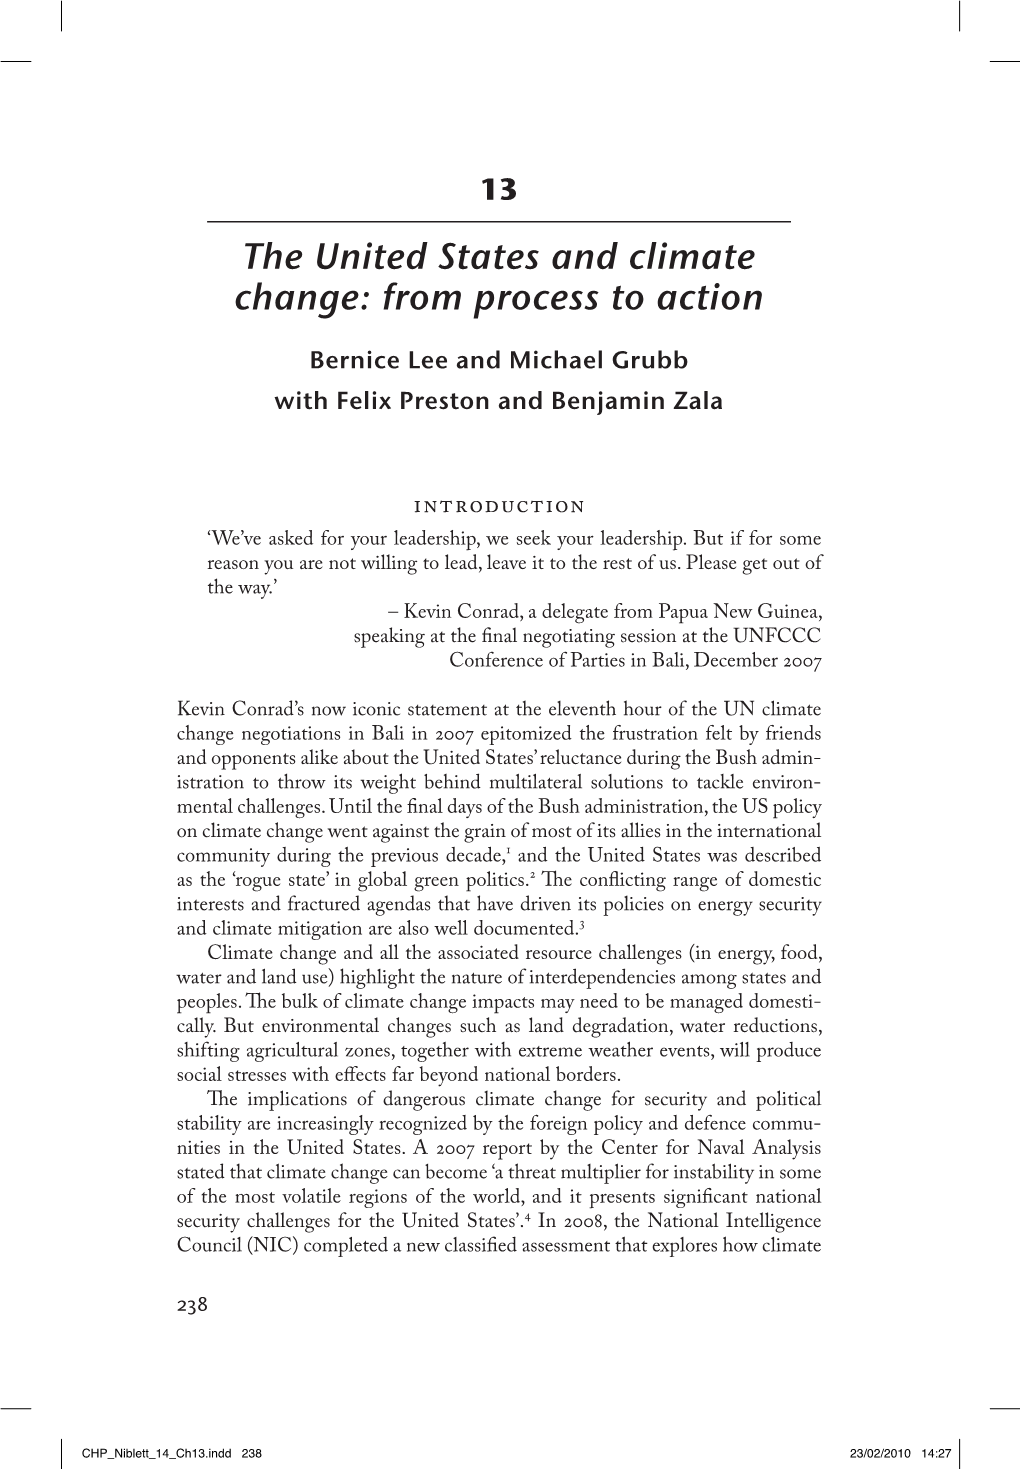 The United States and Climate Change: from Process to Action